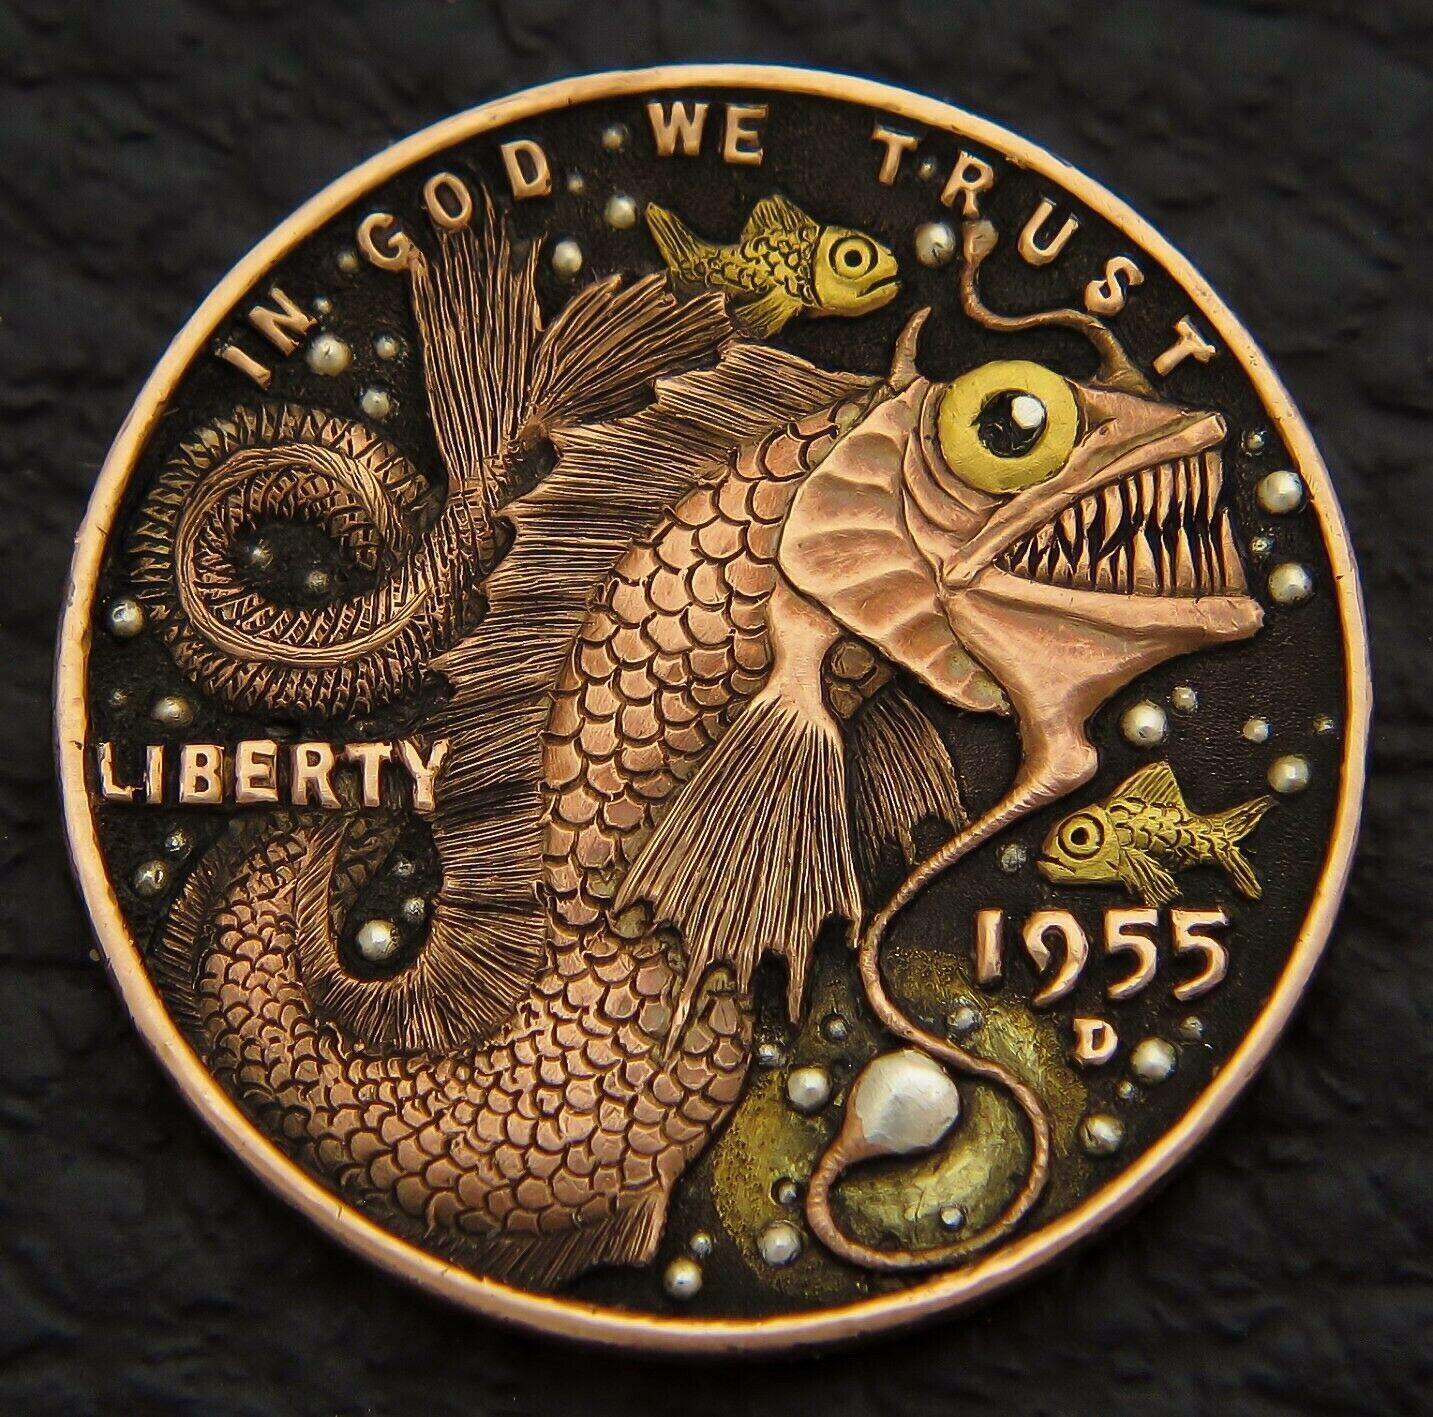 Fish Hand Carved With Inlaid On A Penny | Hobo Nickel, Coin Art, Hobo Art Pertaining To Recent Nickel Metal Wall Art (View 7 of 20)